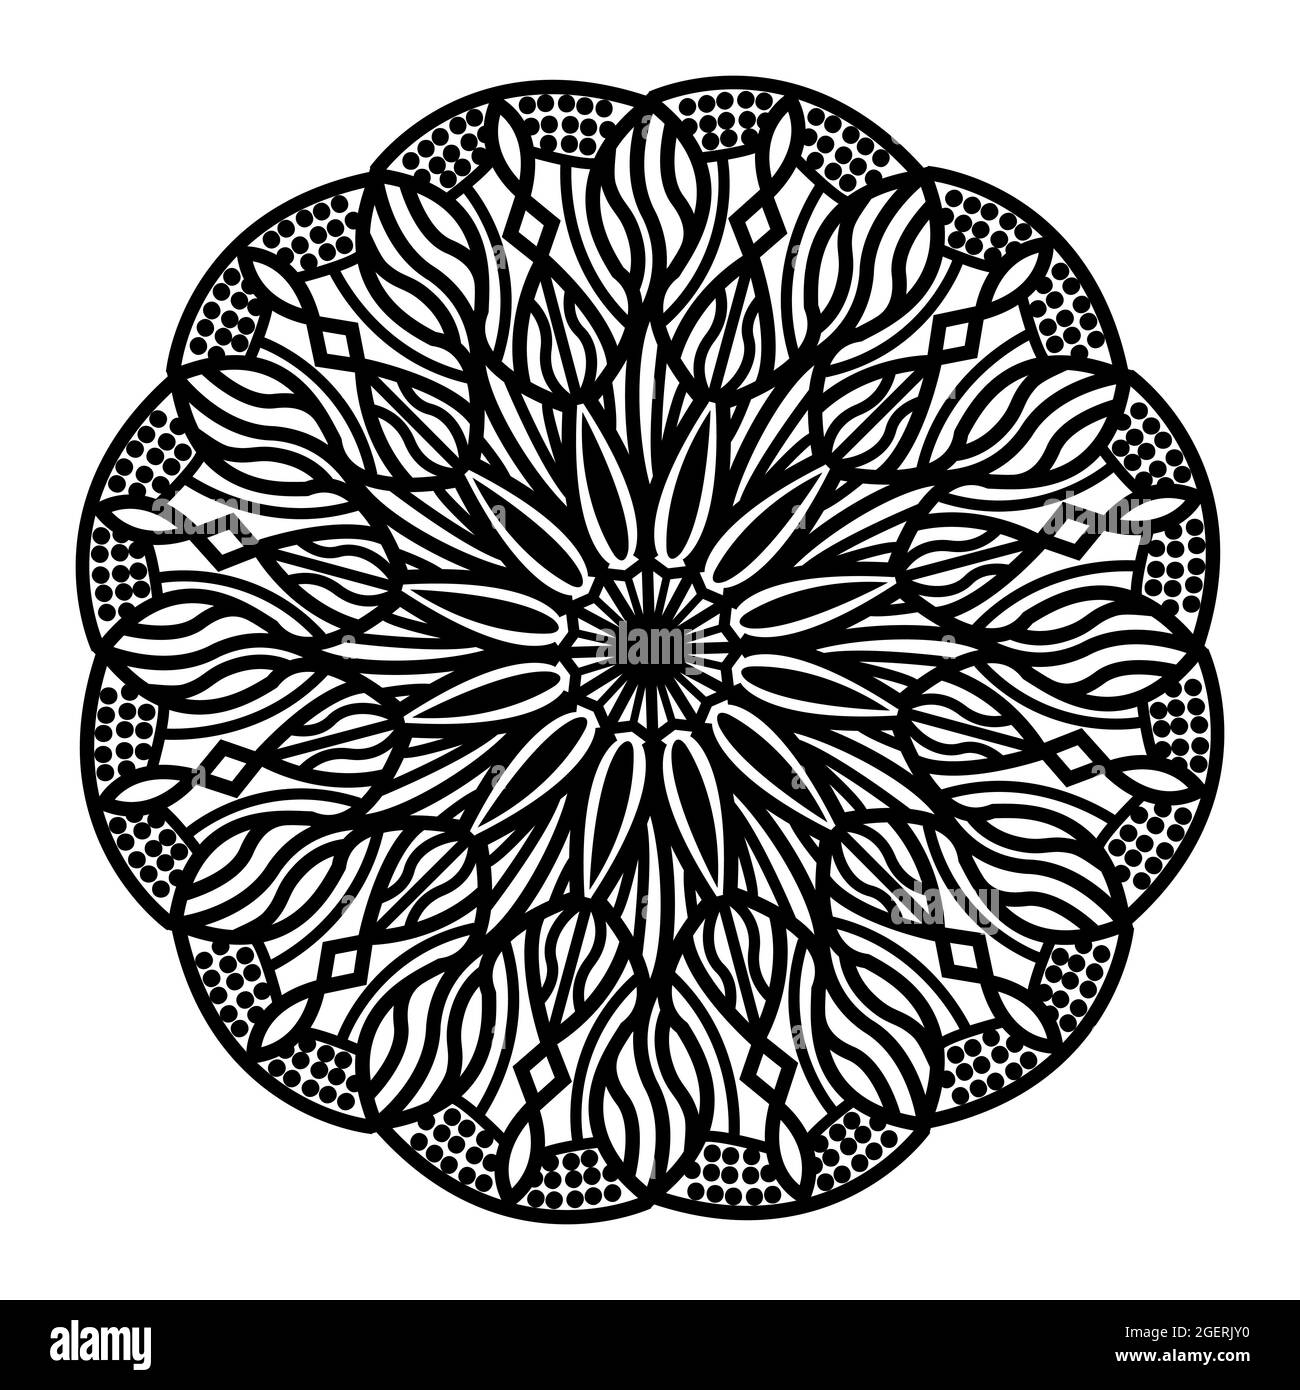 islamic elegant round abstract isolated background design of mandala floral pattern graphic for fabric print artwork Stock Vector